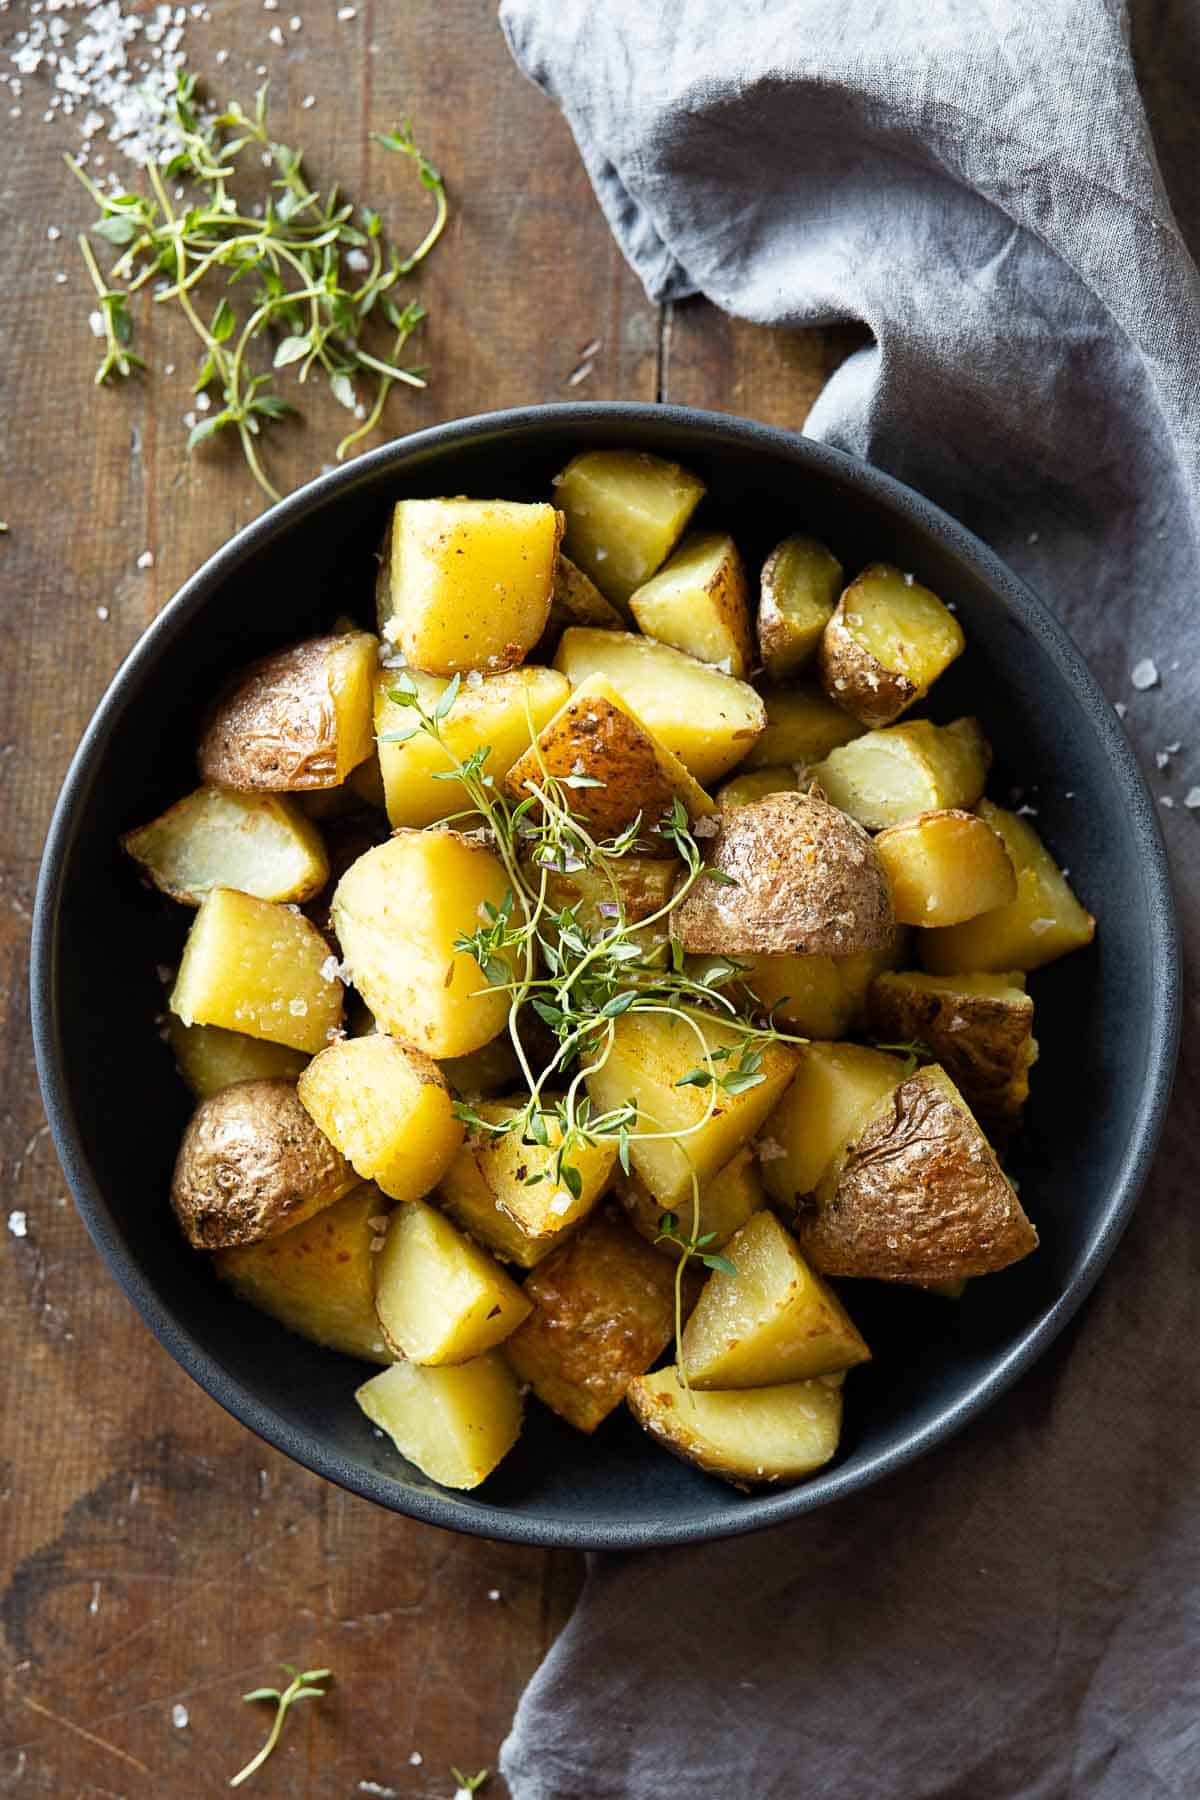 Cooked cut up red potatoes in a grey bowl garnished with fresh thyme.